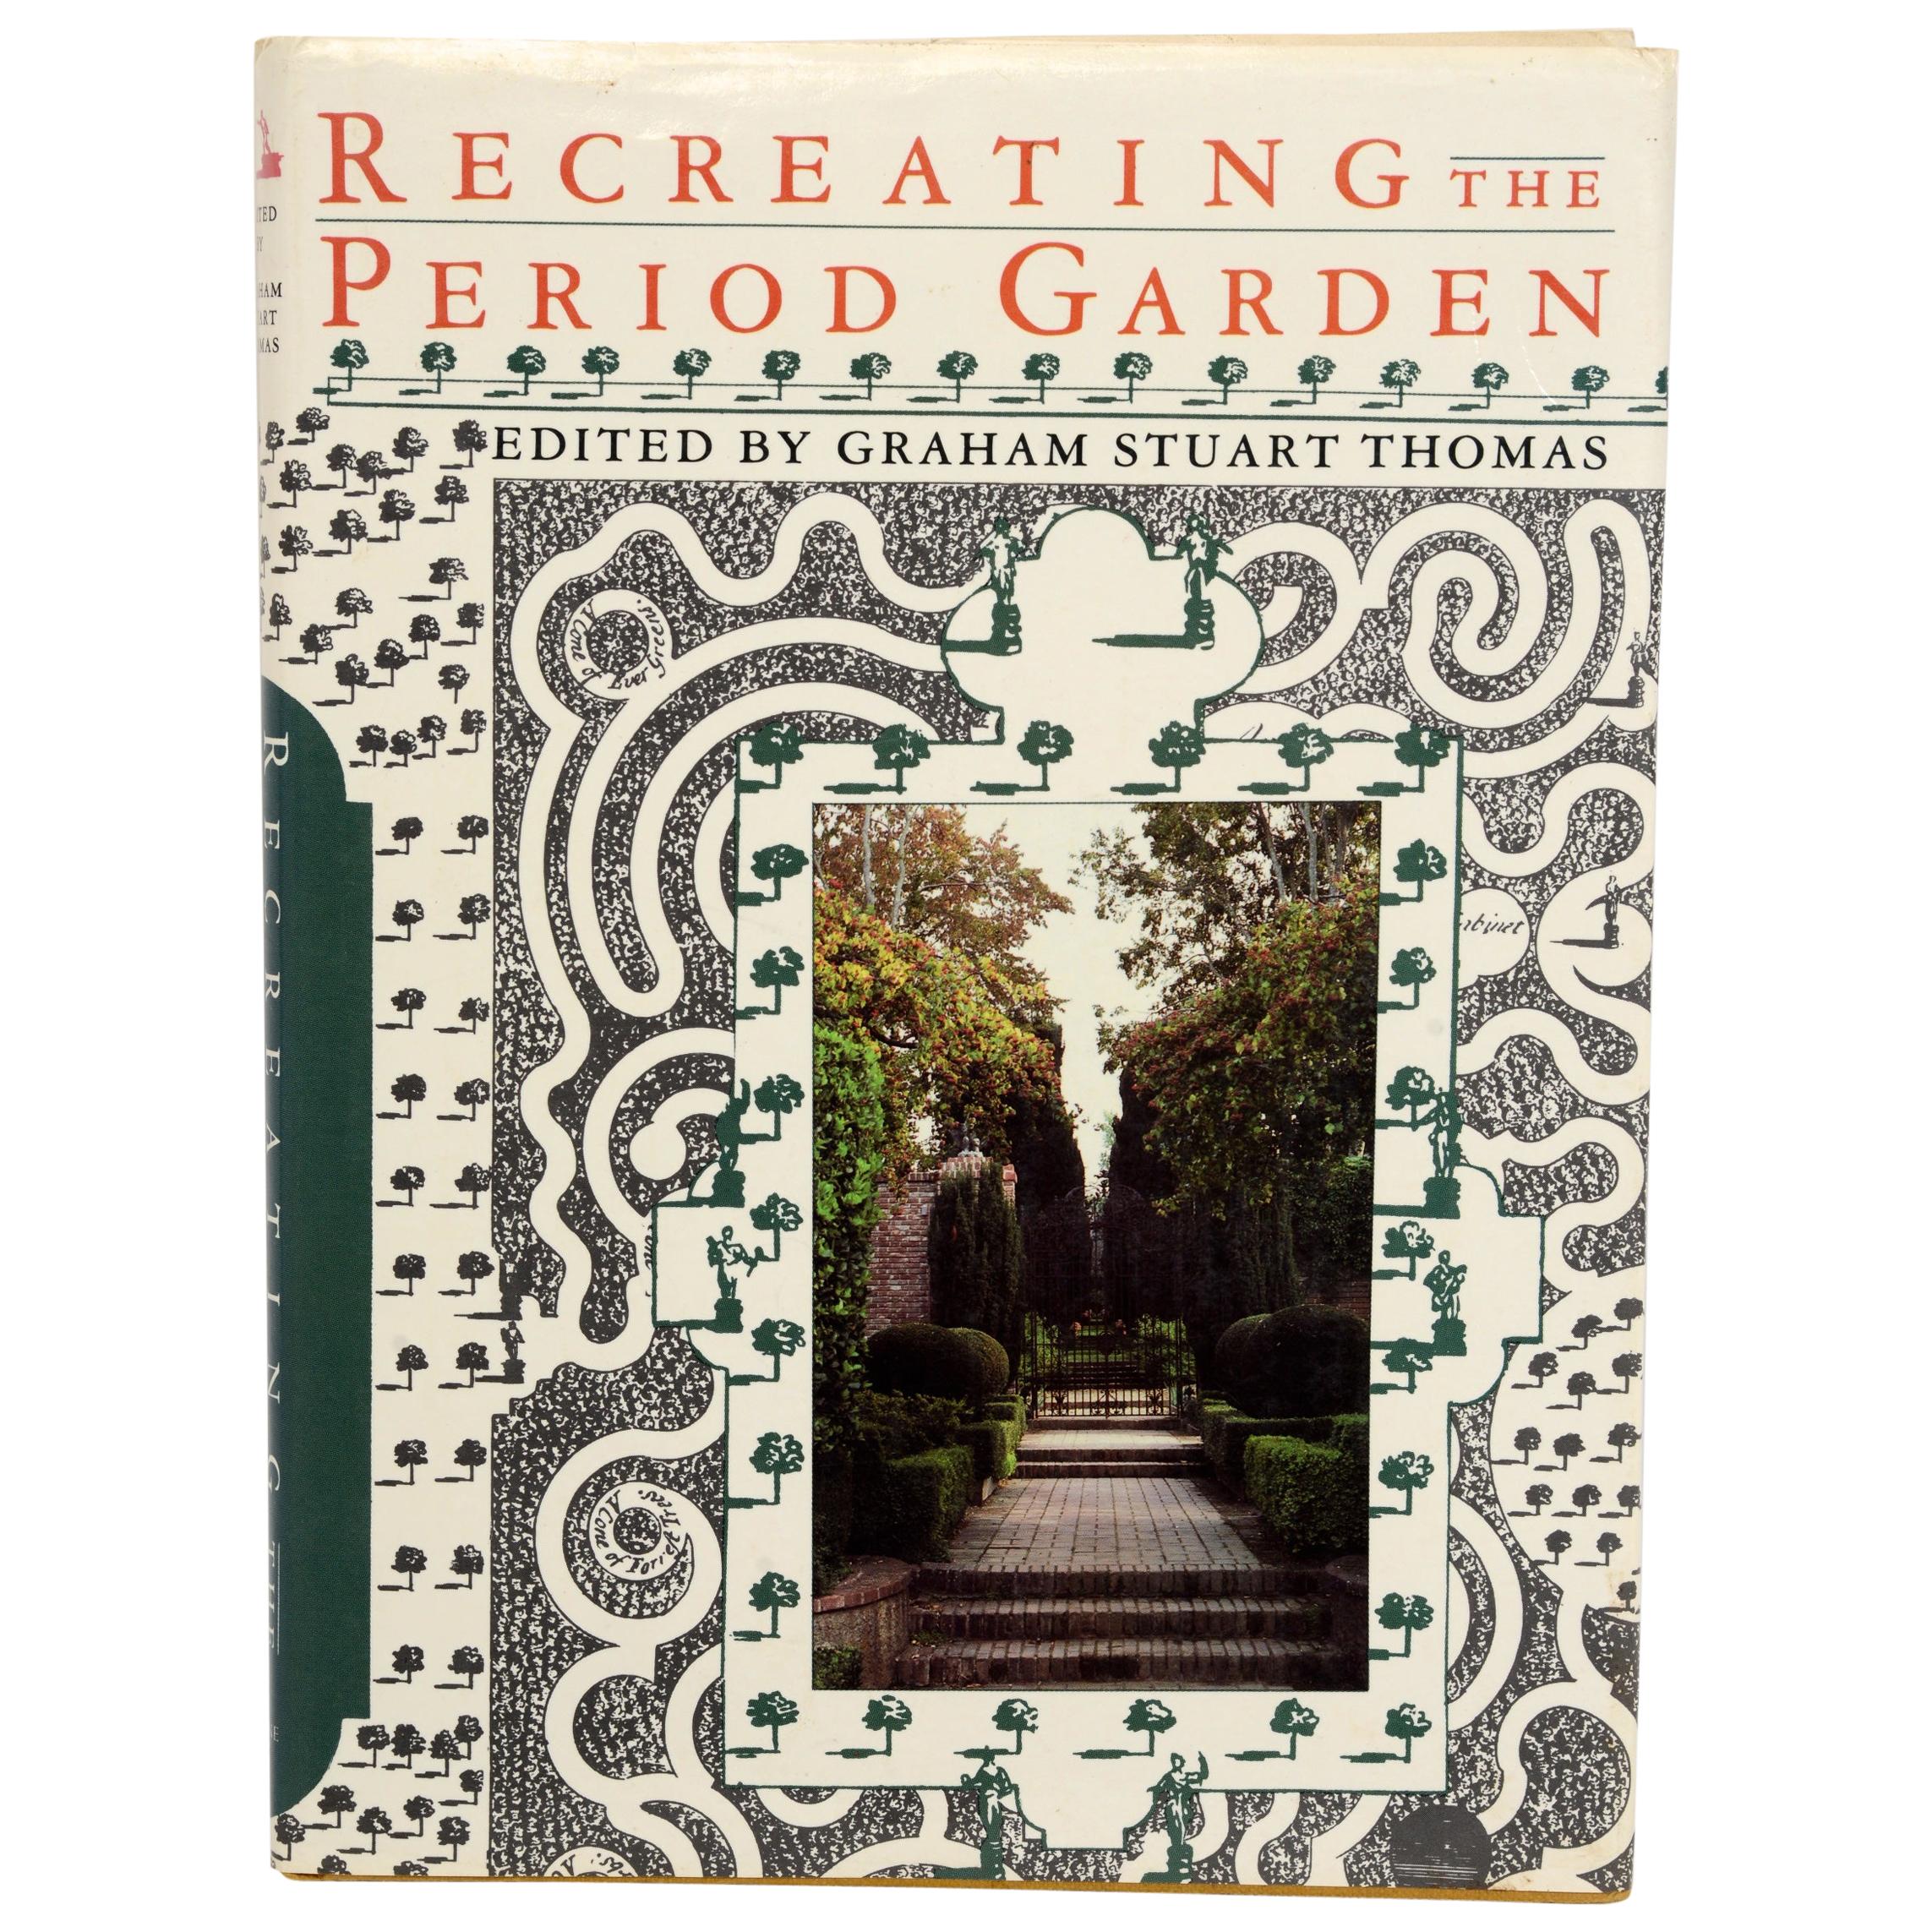 "Recreating the Period Garden" by Graham by Stuart Thomas, First Edition